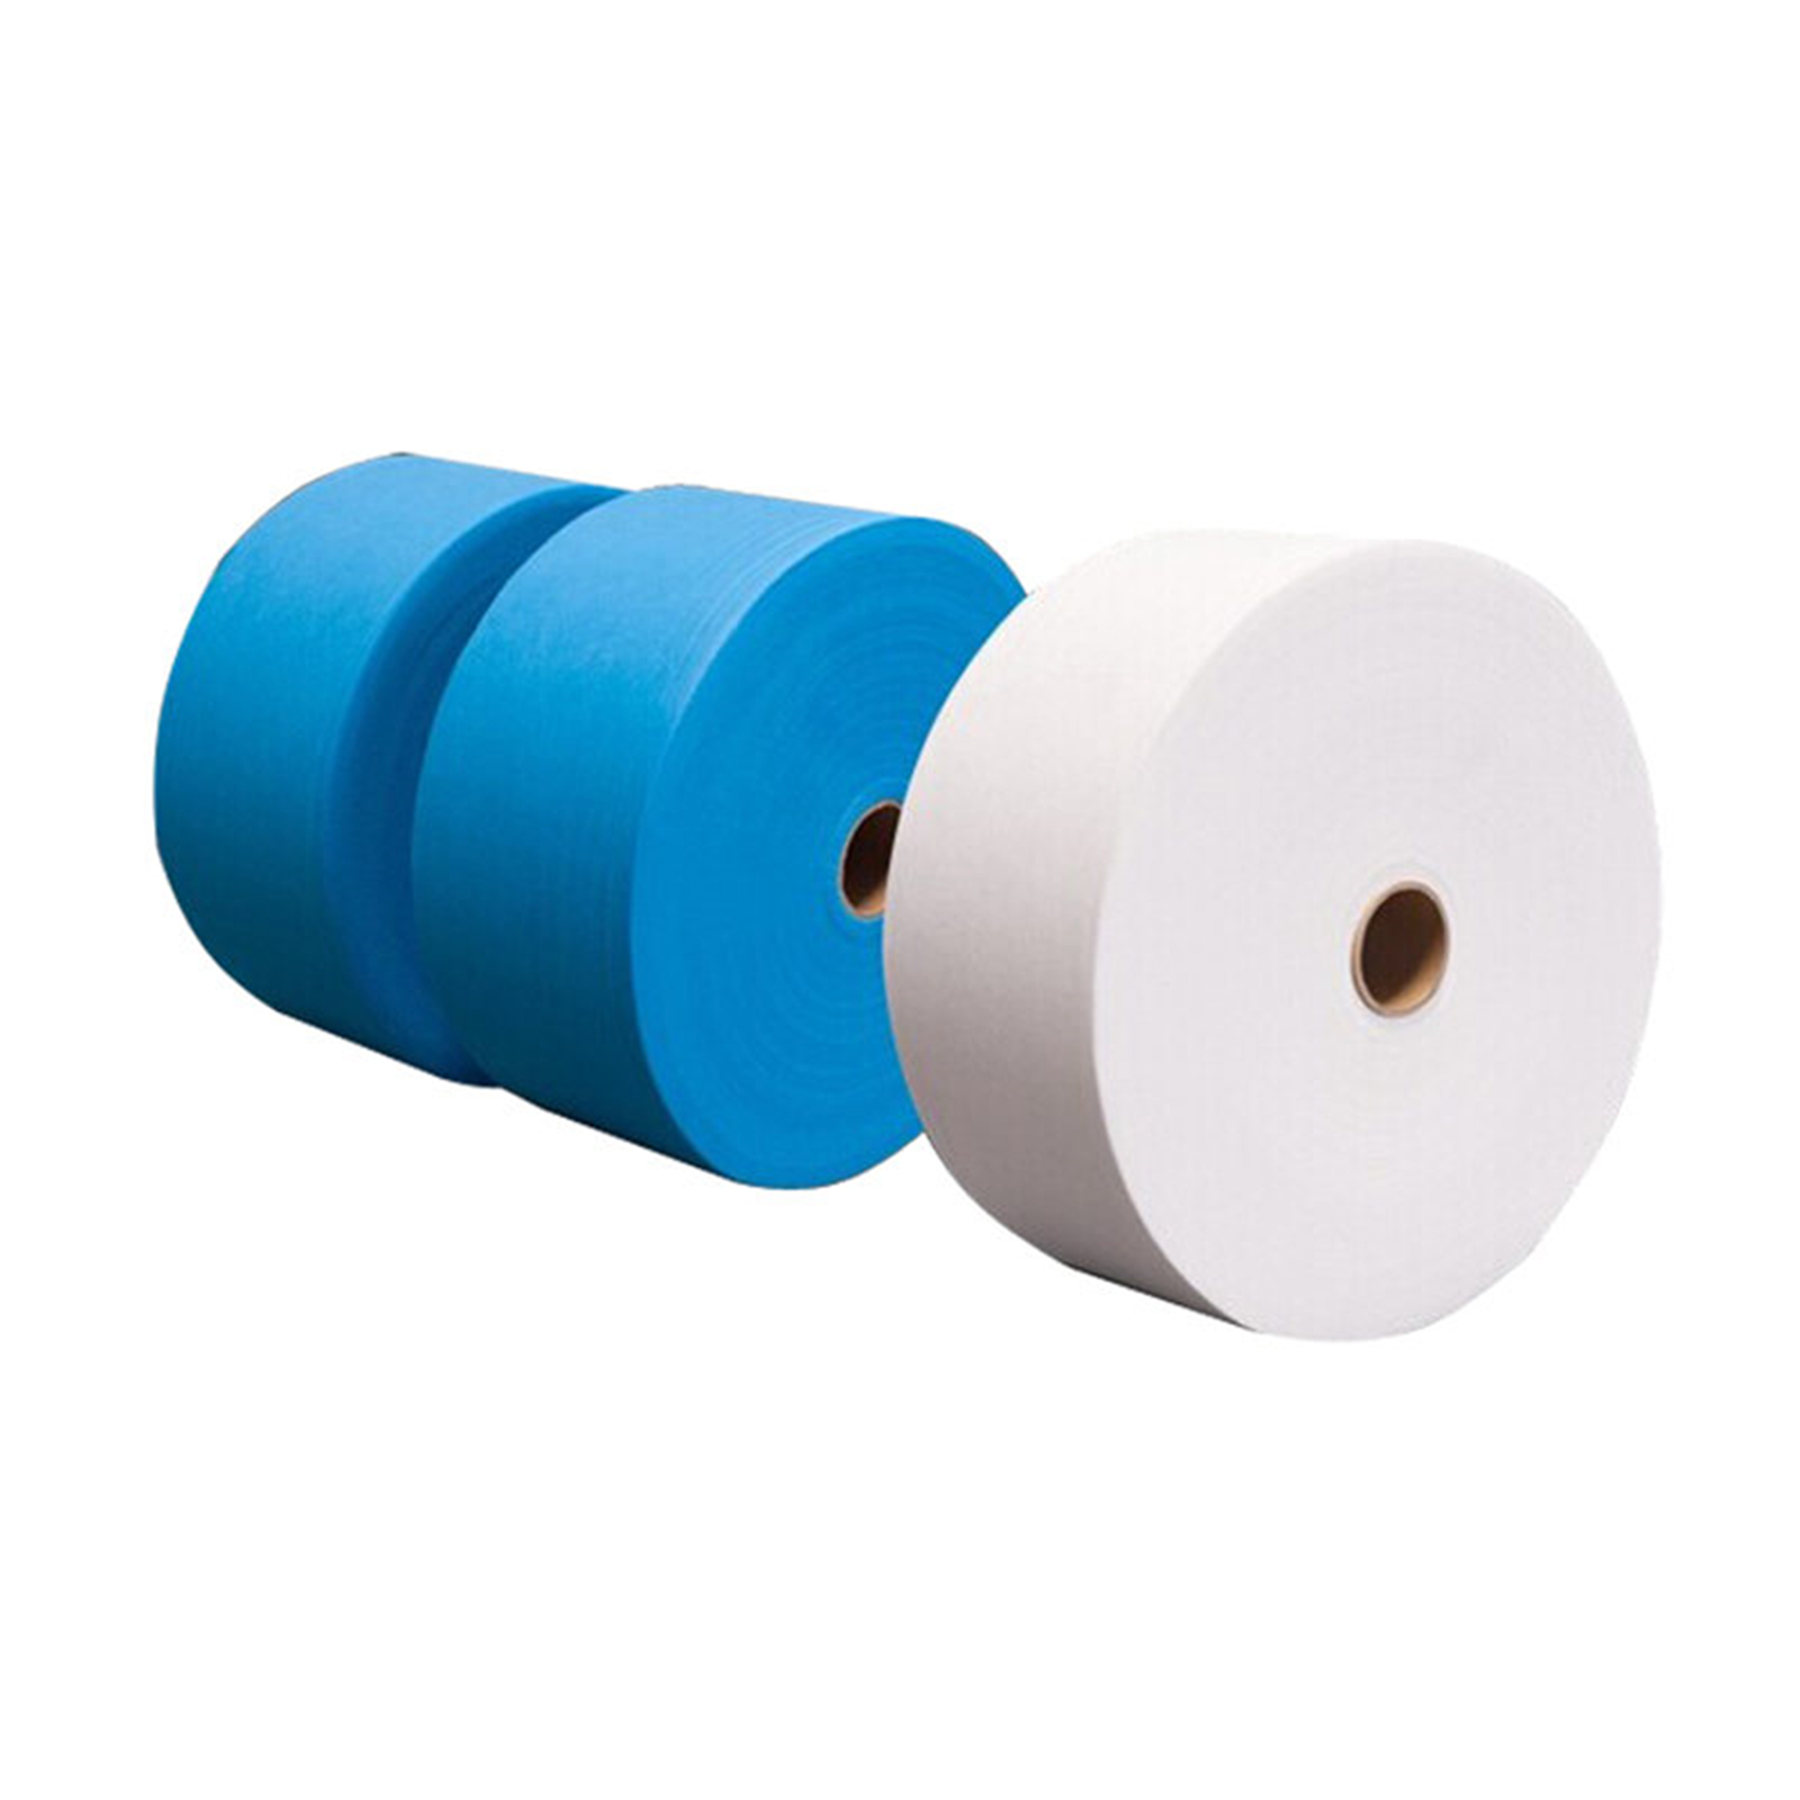 25gsm Melt Blown Nonwoven Fabric for Face Mask Filter Layer 175mm